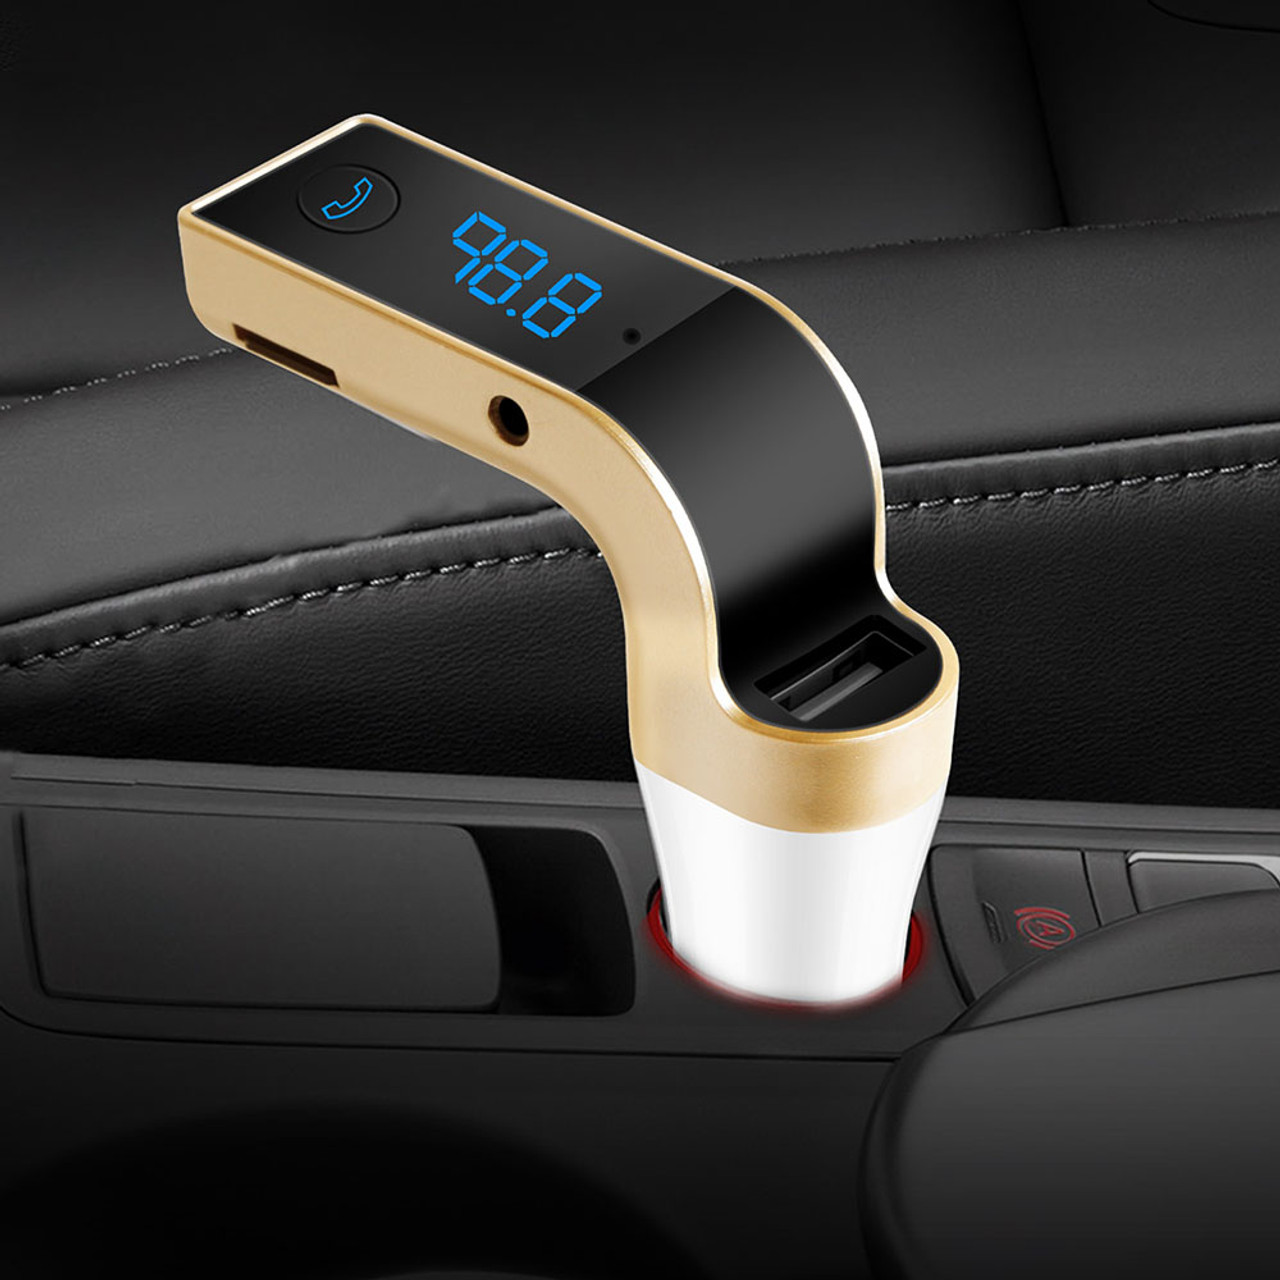 Wireless Car Bluetooth FM Transmitter product image